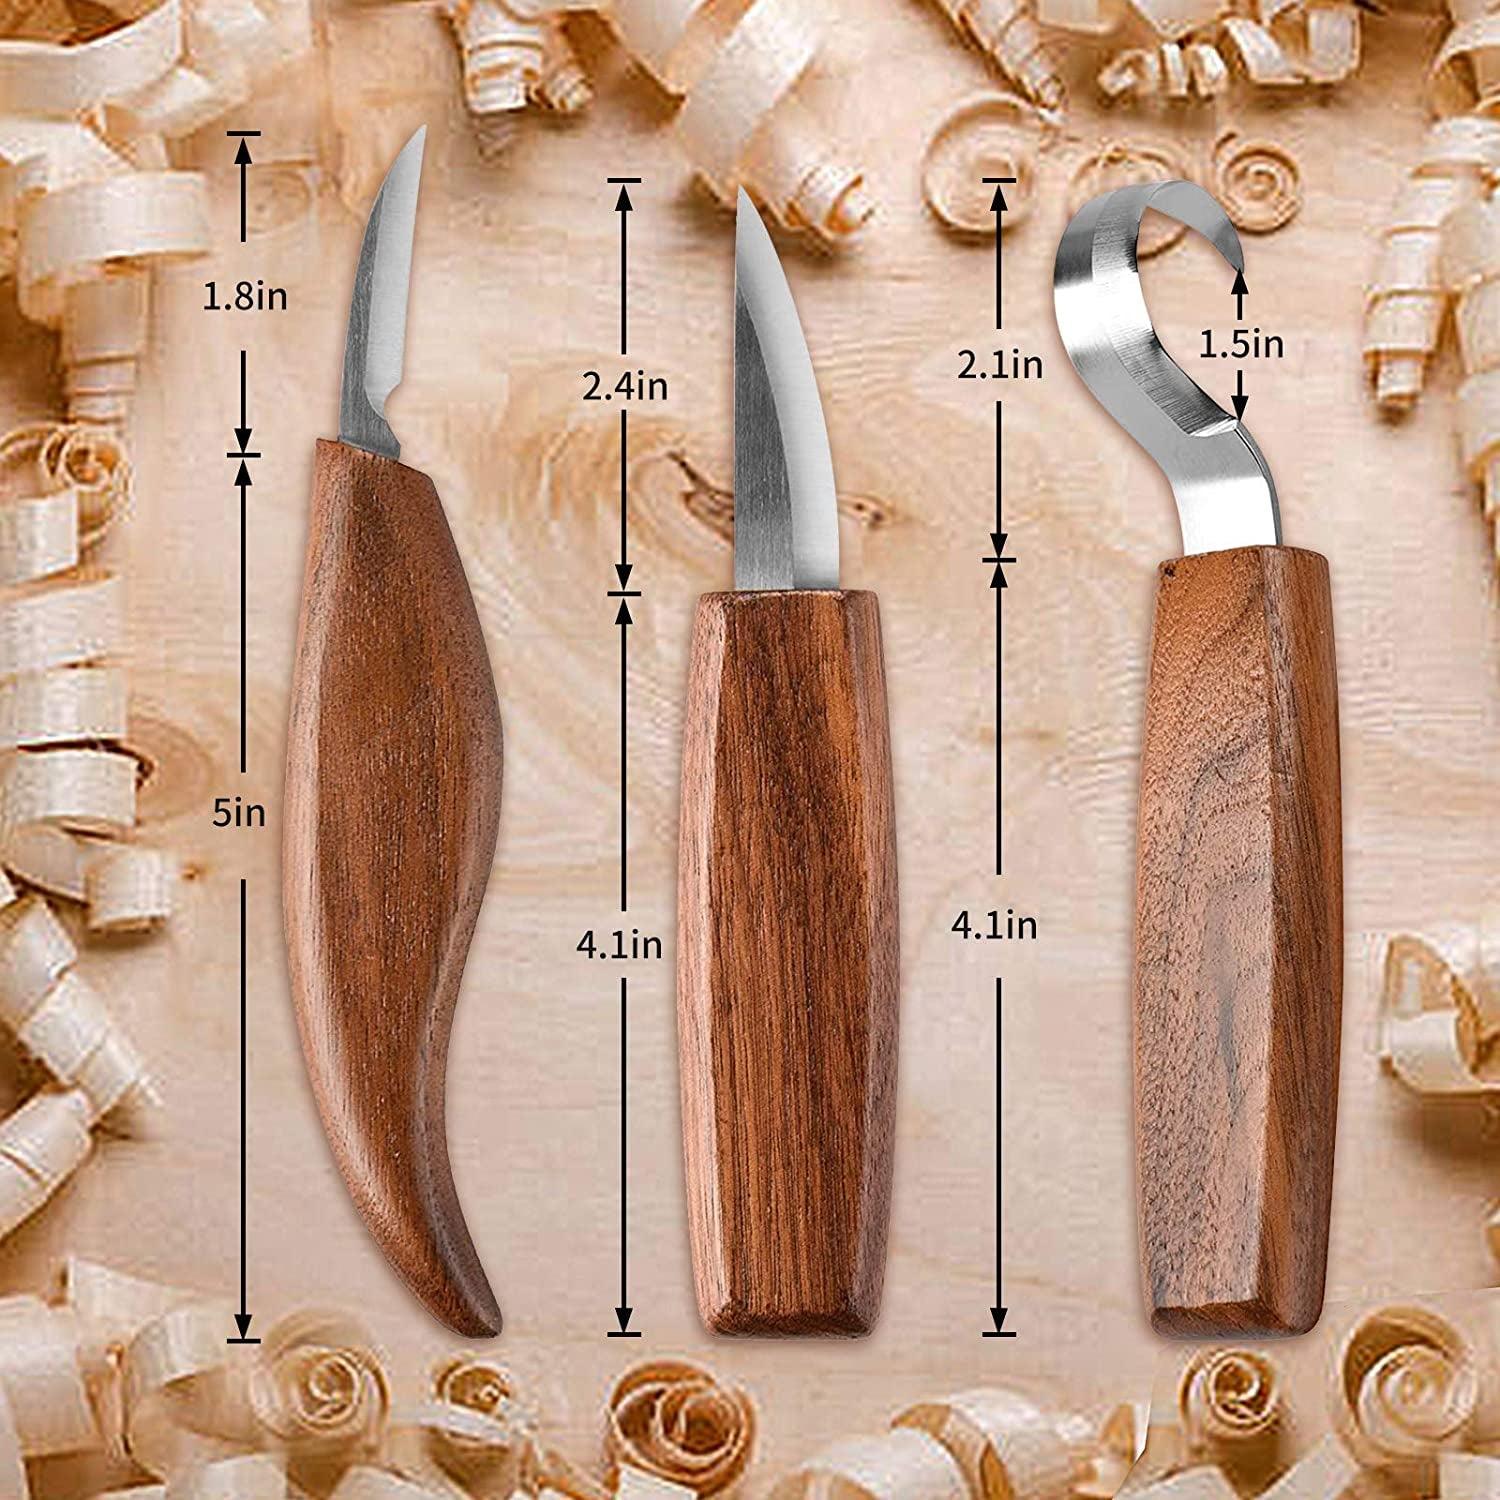 Wood Carving Tools 7 In 1 Wood Carving Knife Kit With Carving Hook